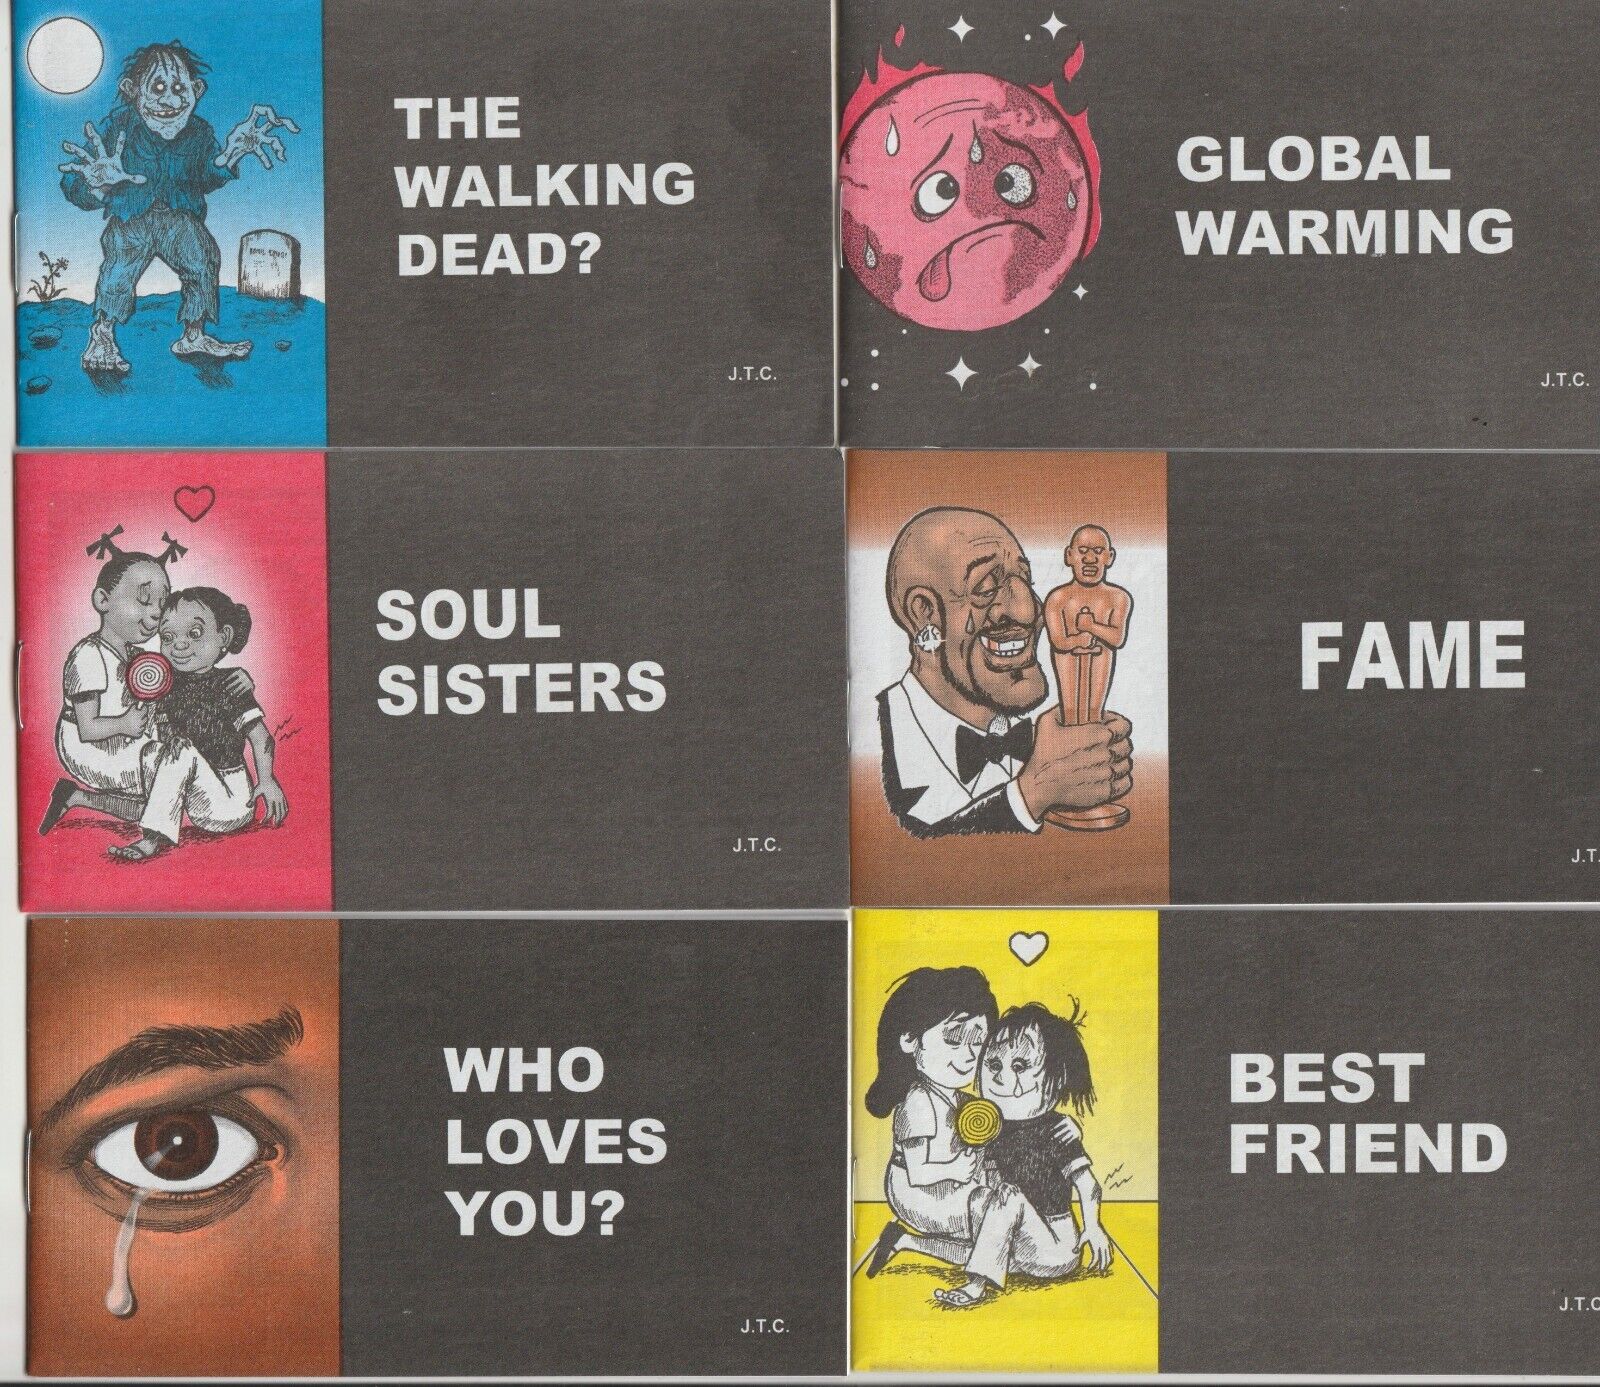 THE WALKING DEAD?, GLOBAL WARMING  10 Chick Bible tracts sent 1st class from OK